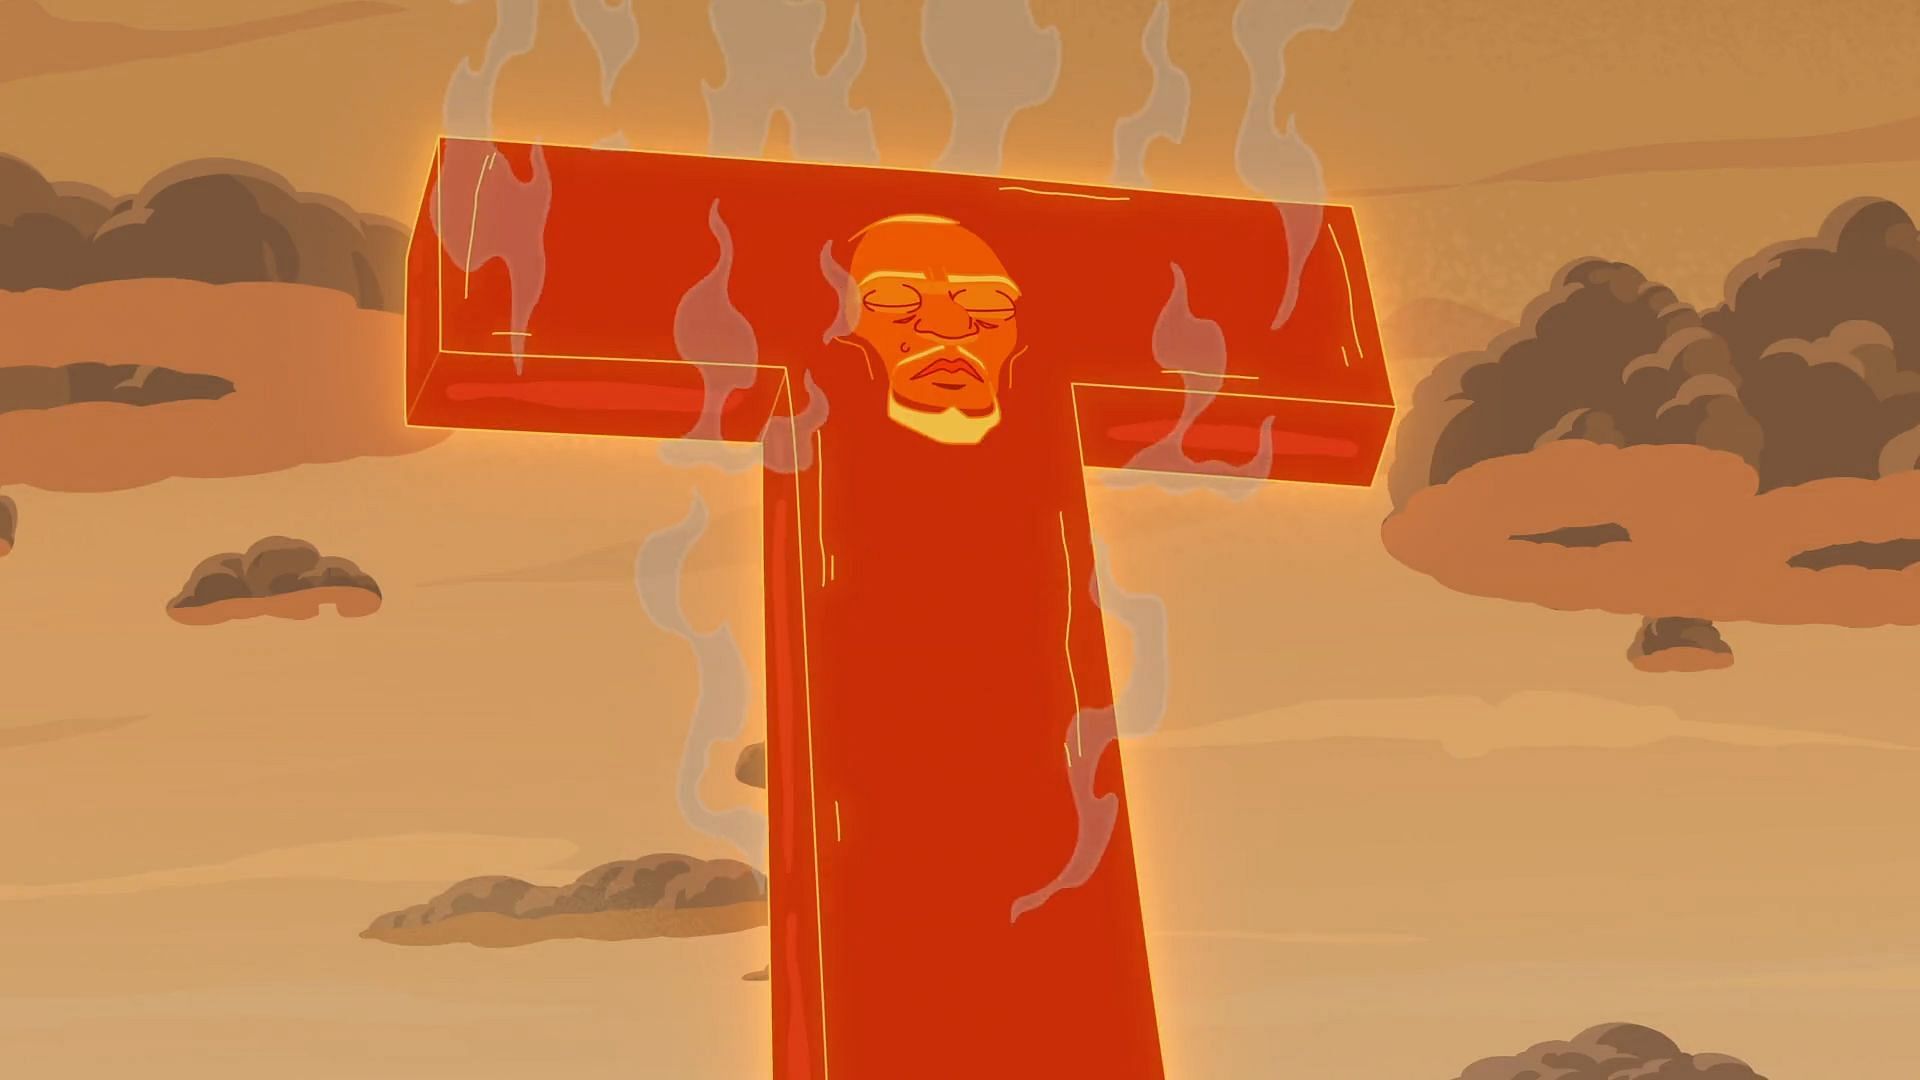 King Magma-T, as seen in Rick and Morty season 7 episode 8 (Image via Adult Swim)